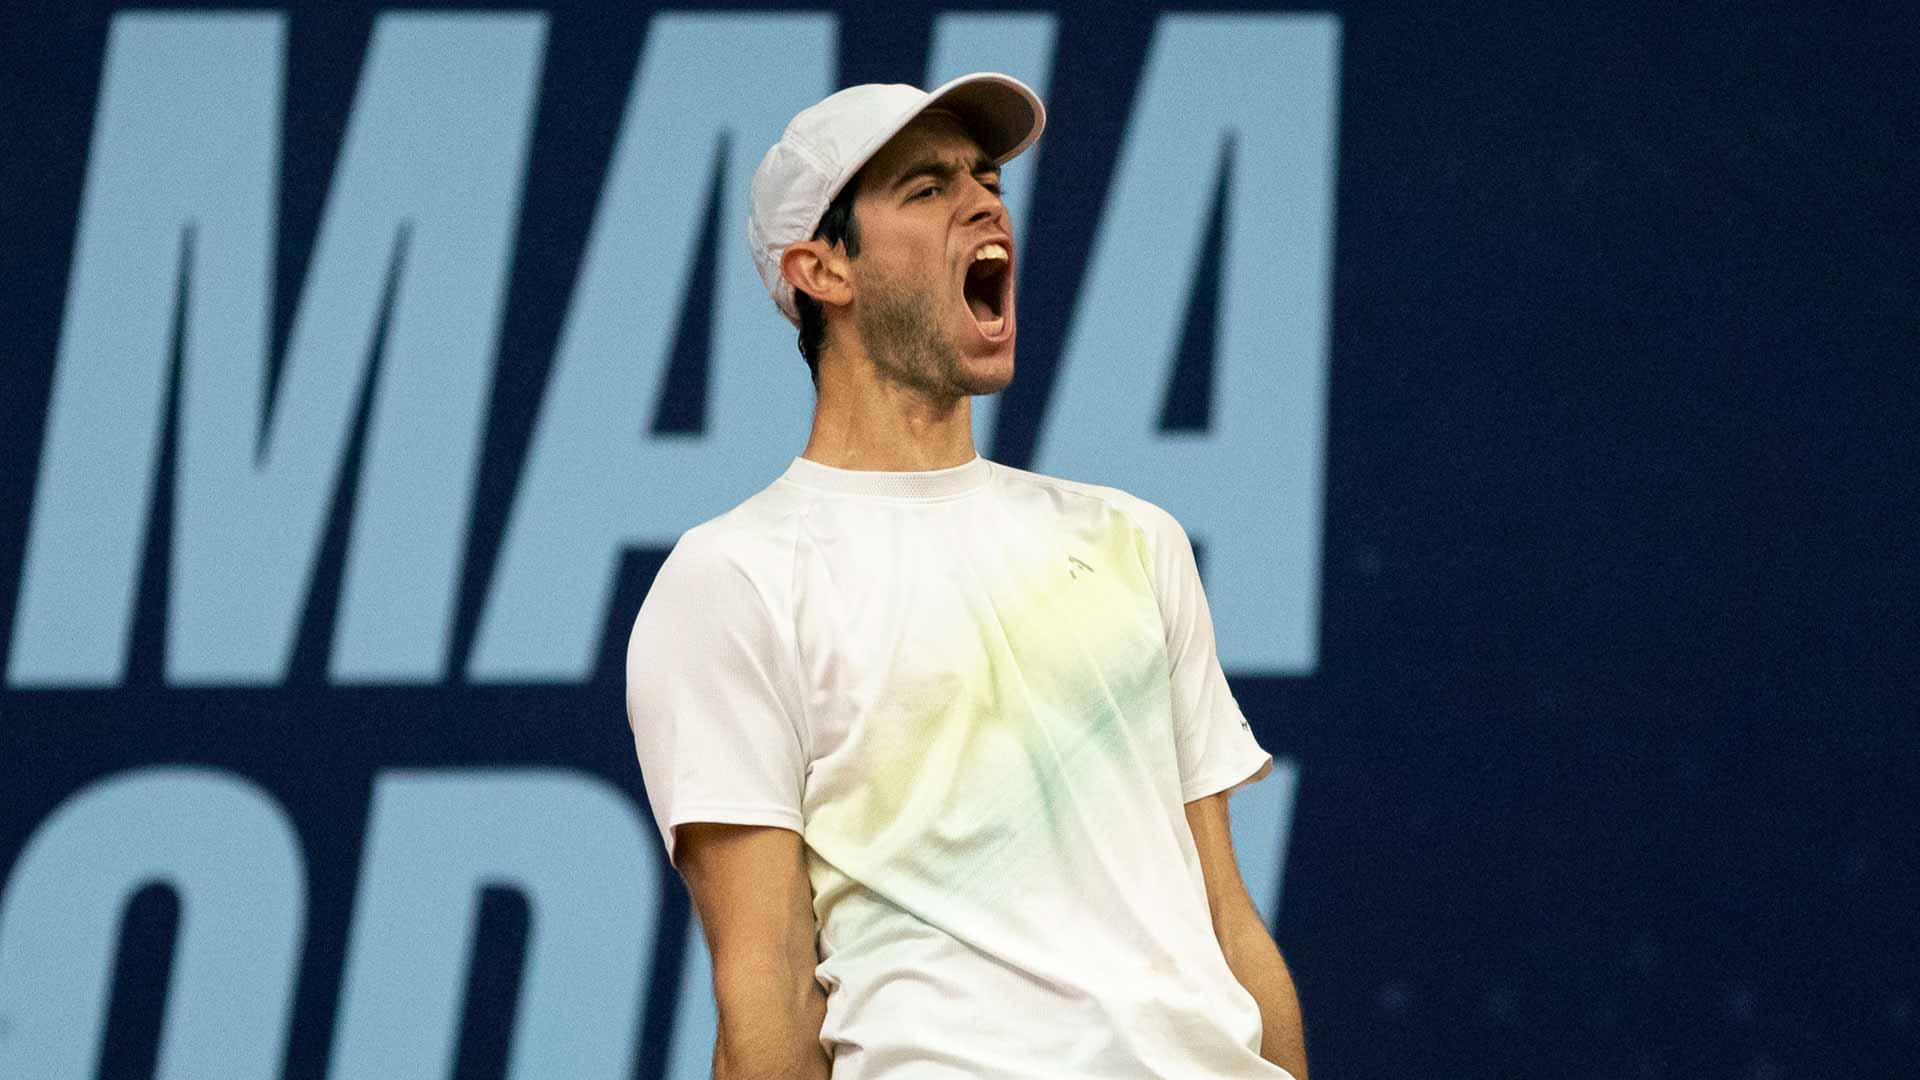 Nuno Borges celebrates winning the ATP Challenger Tour 100 event in Maia, Portugal.